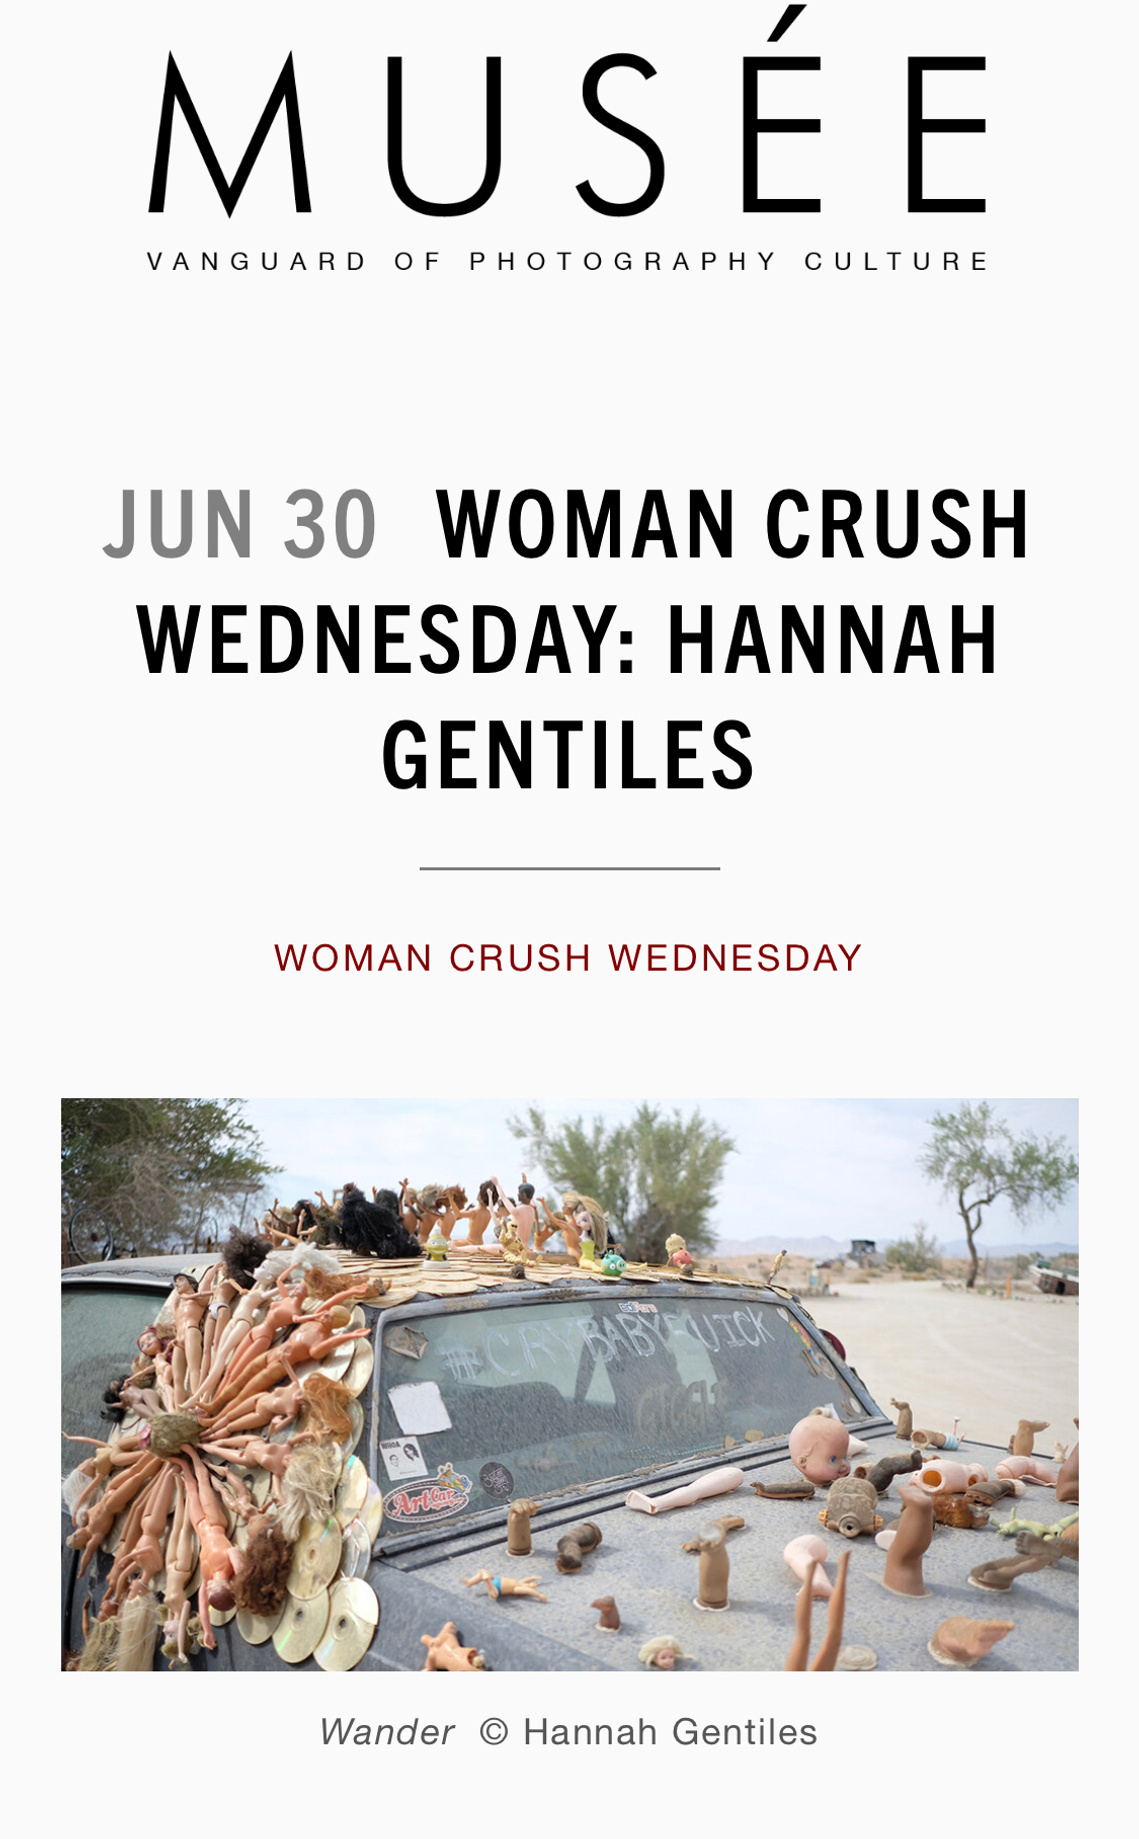 MUSEE'S WOMAN CRUSH WEDNESDAY: HANNAH GENTILES